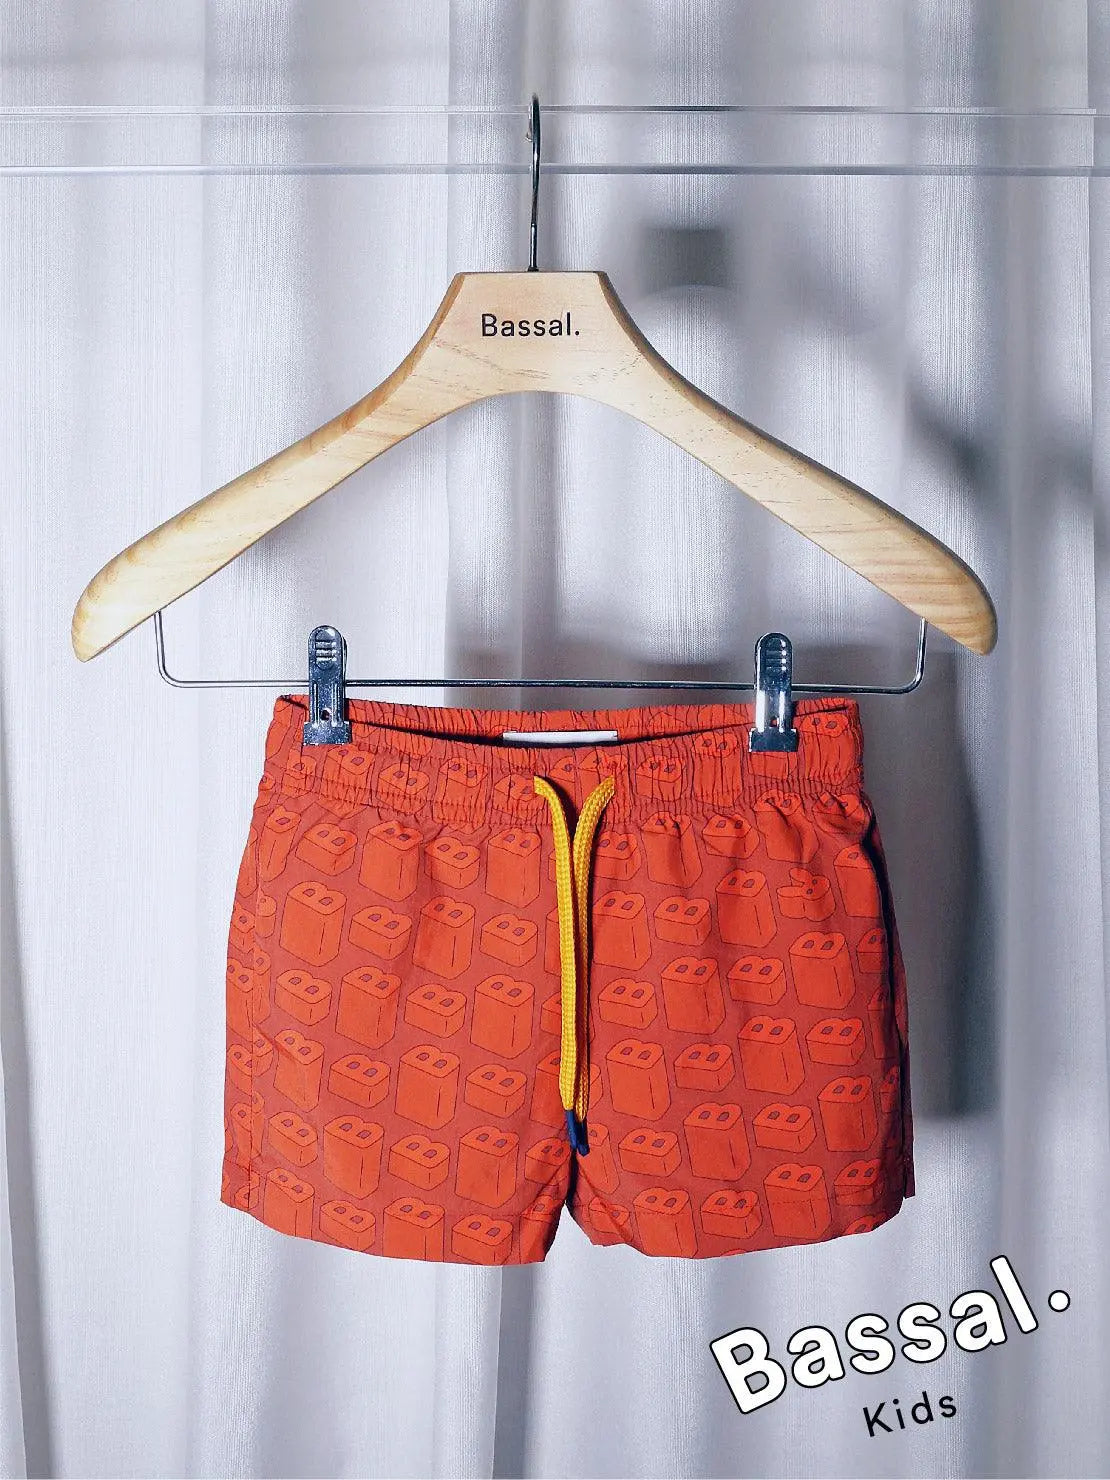 Bright orange children's swim shorts with a happy cartoon face pattern hang on a wooden hanger labeled "Bassal." The shorts, known as B's Red Kids Swimwear, feature a yellow drawstring and metallic clips, with the brand name "Bassal" displayed in the bottom right corner. Available at bassalstore in Barcelona.